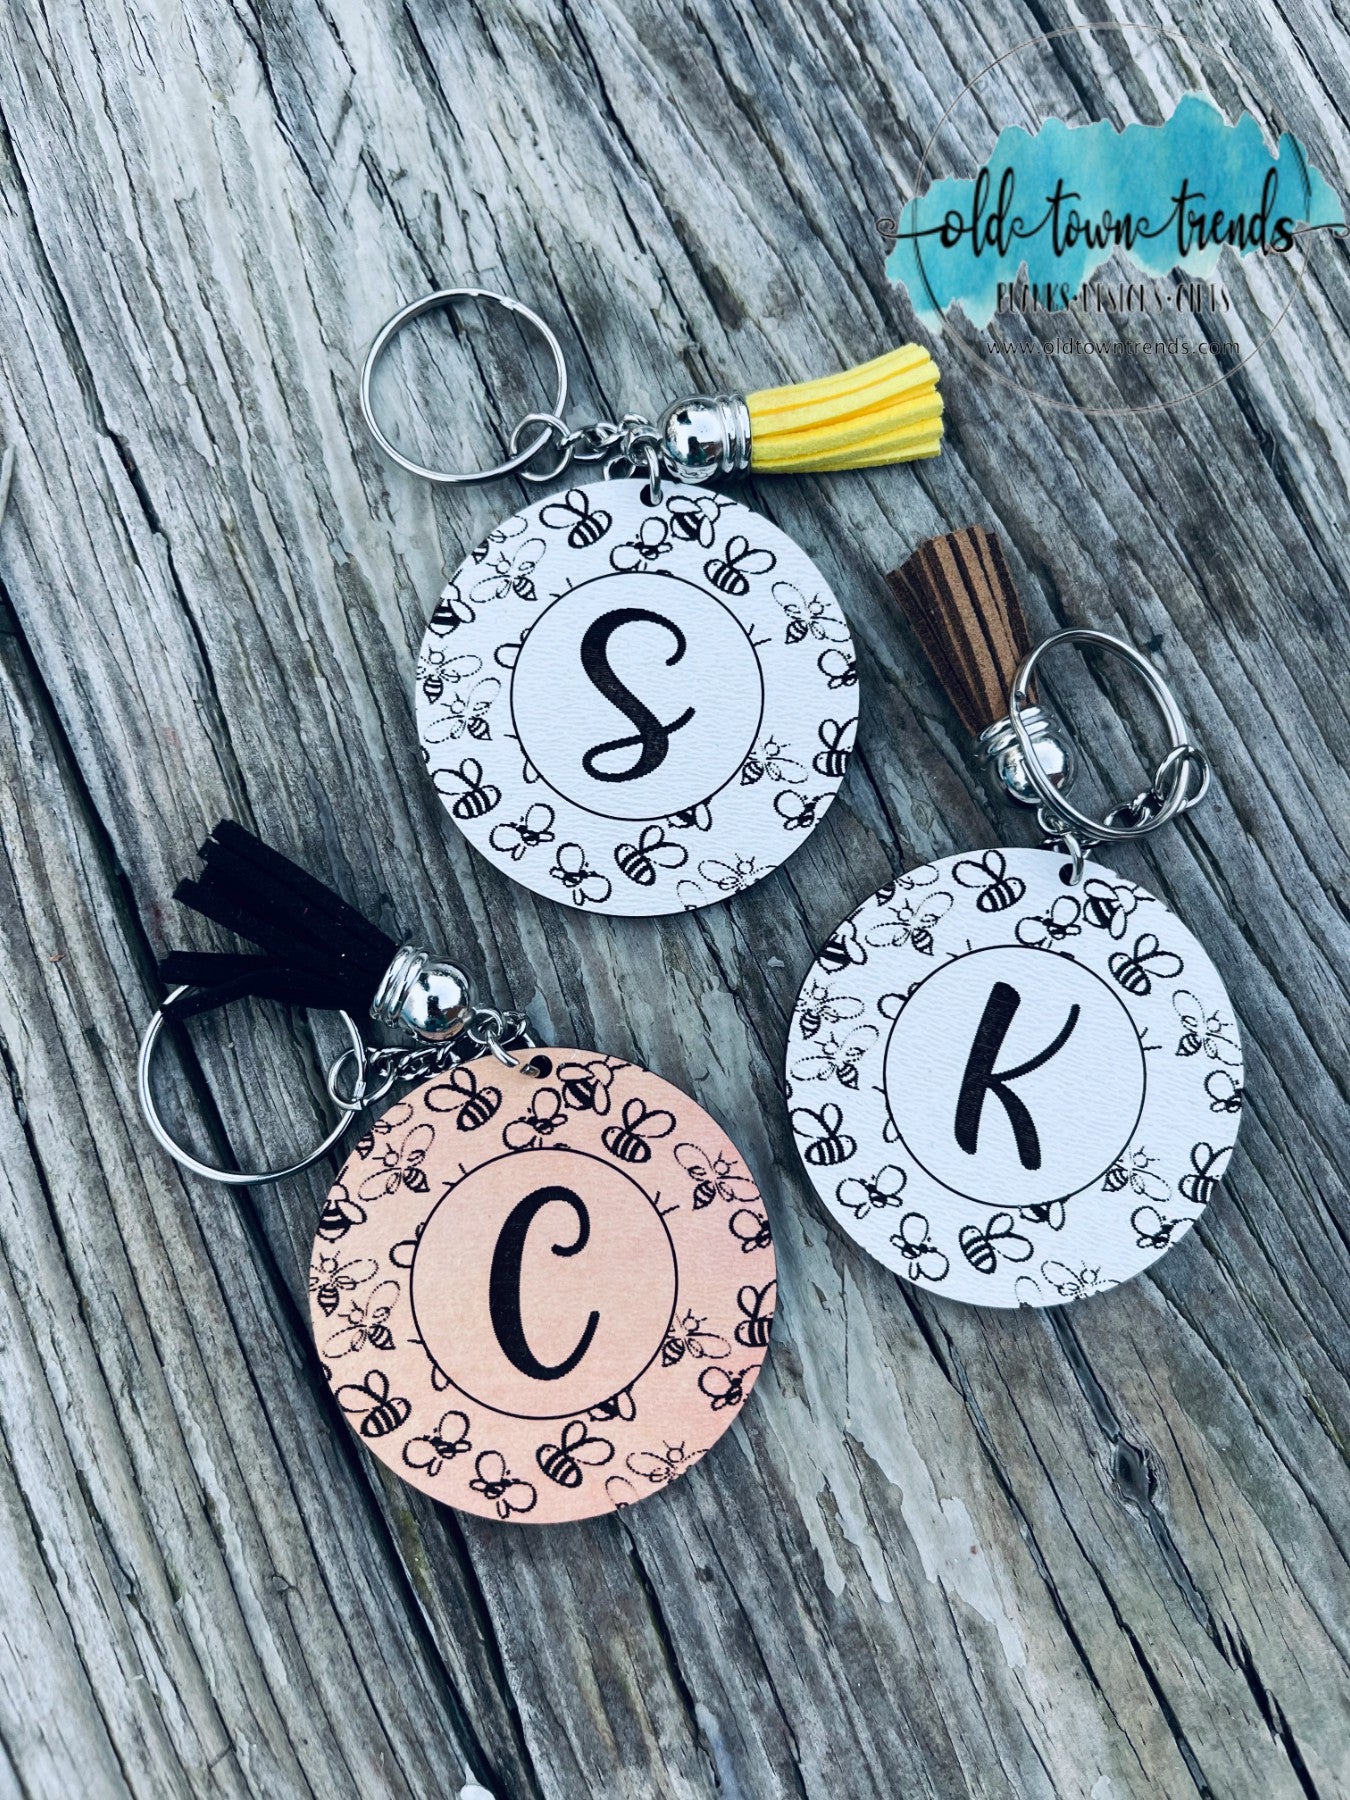 OldTownTrends Bee Pattern Engraved Initial Keychain Set, Keychains Svg, Scrap Fillers, Money Makers, Laser Ready